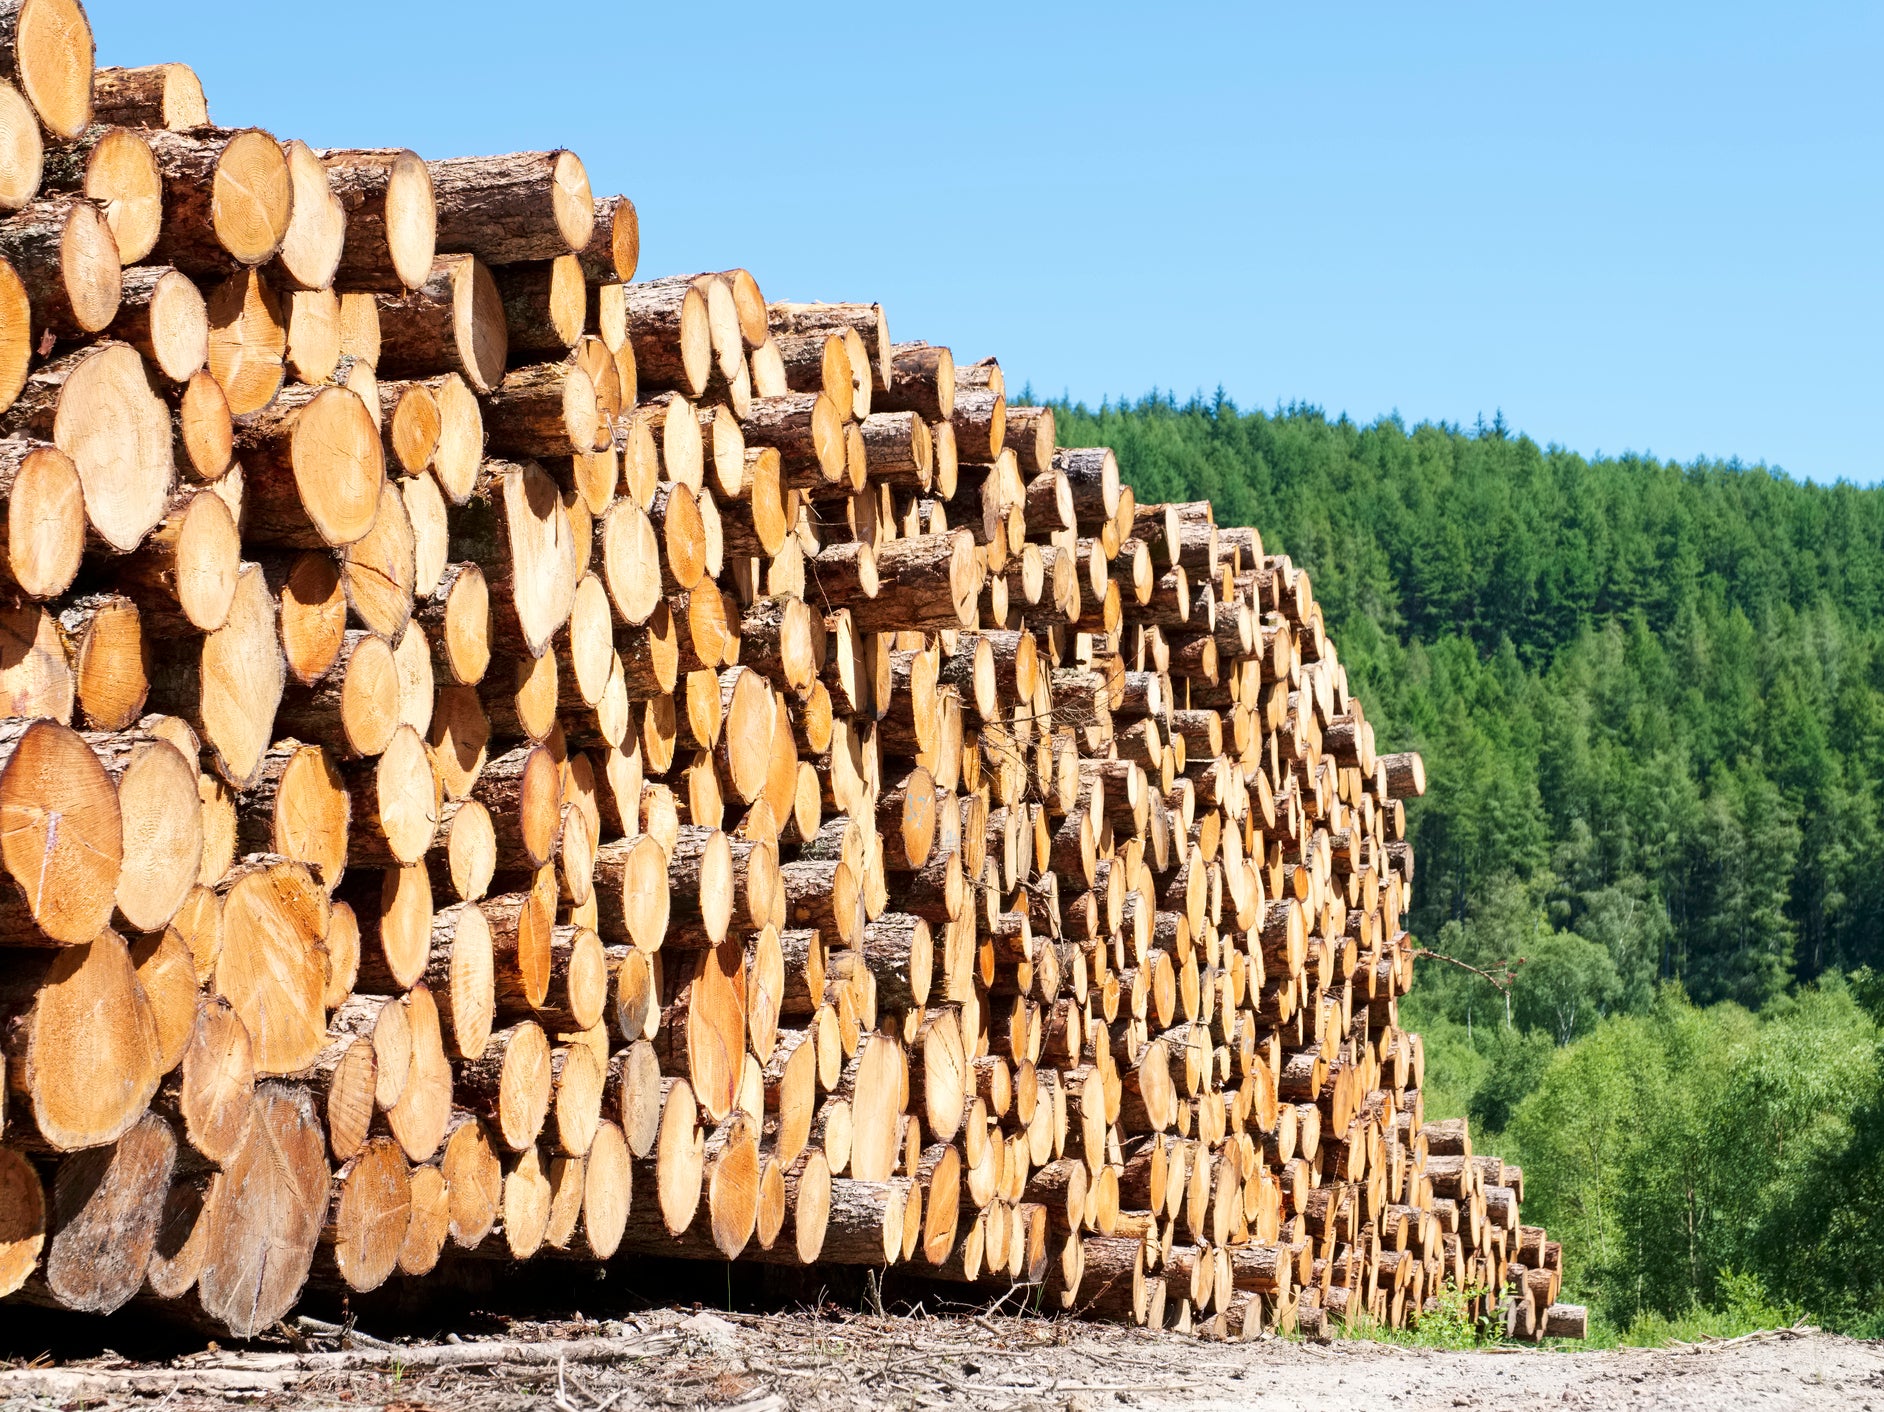 Log Lomond: Piles of logs to be used for biomass energy near Loch Lomond in Scotland